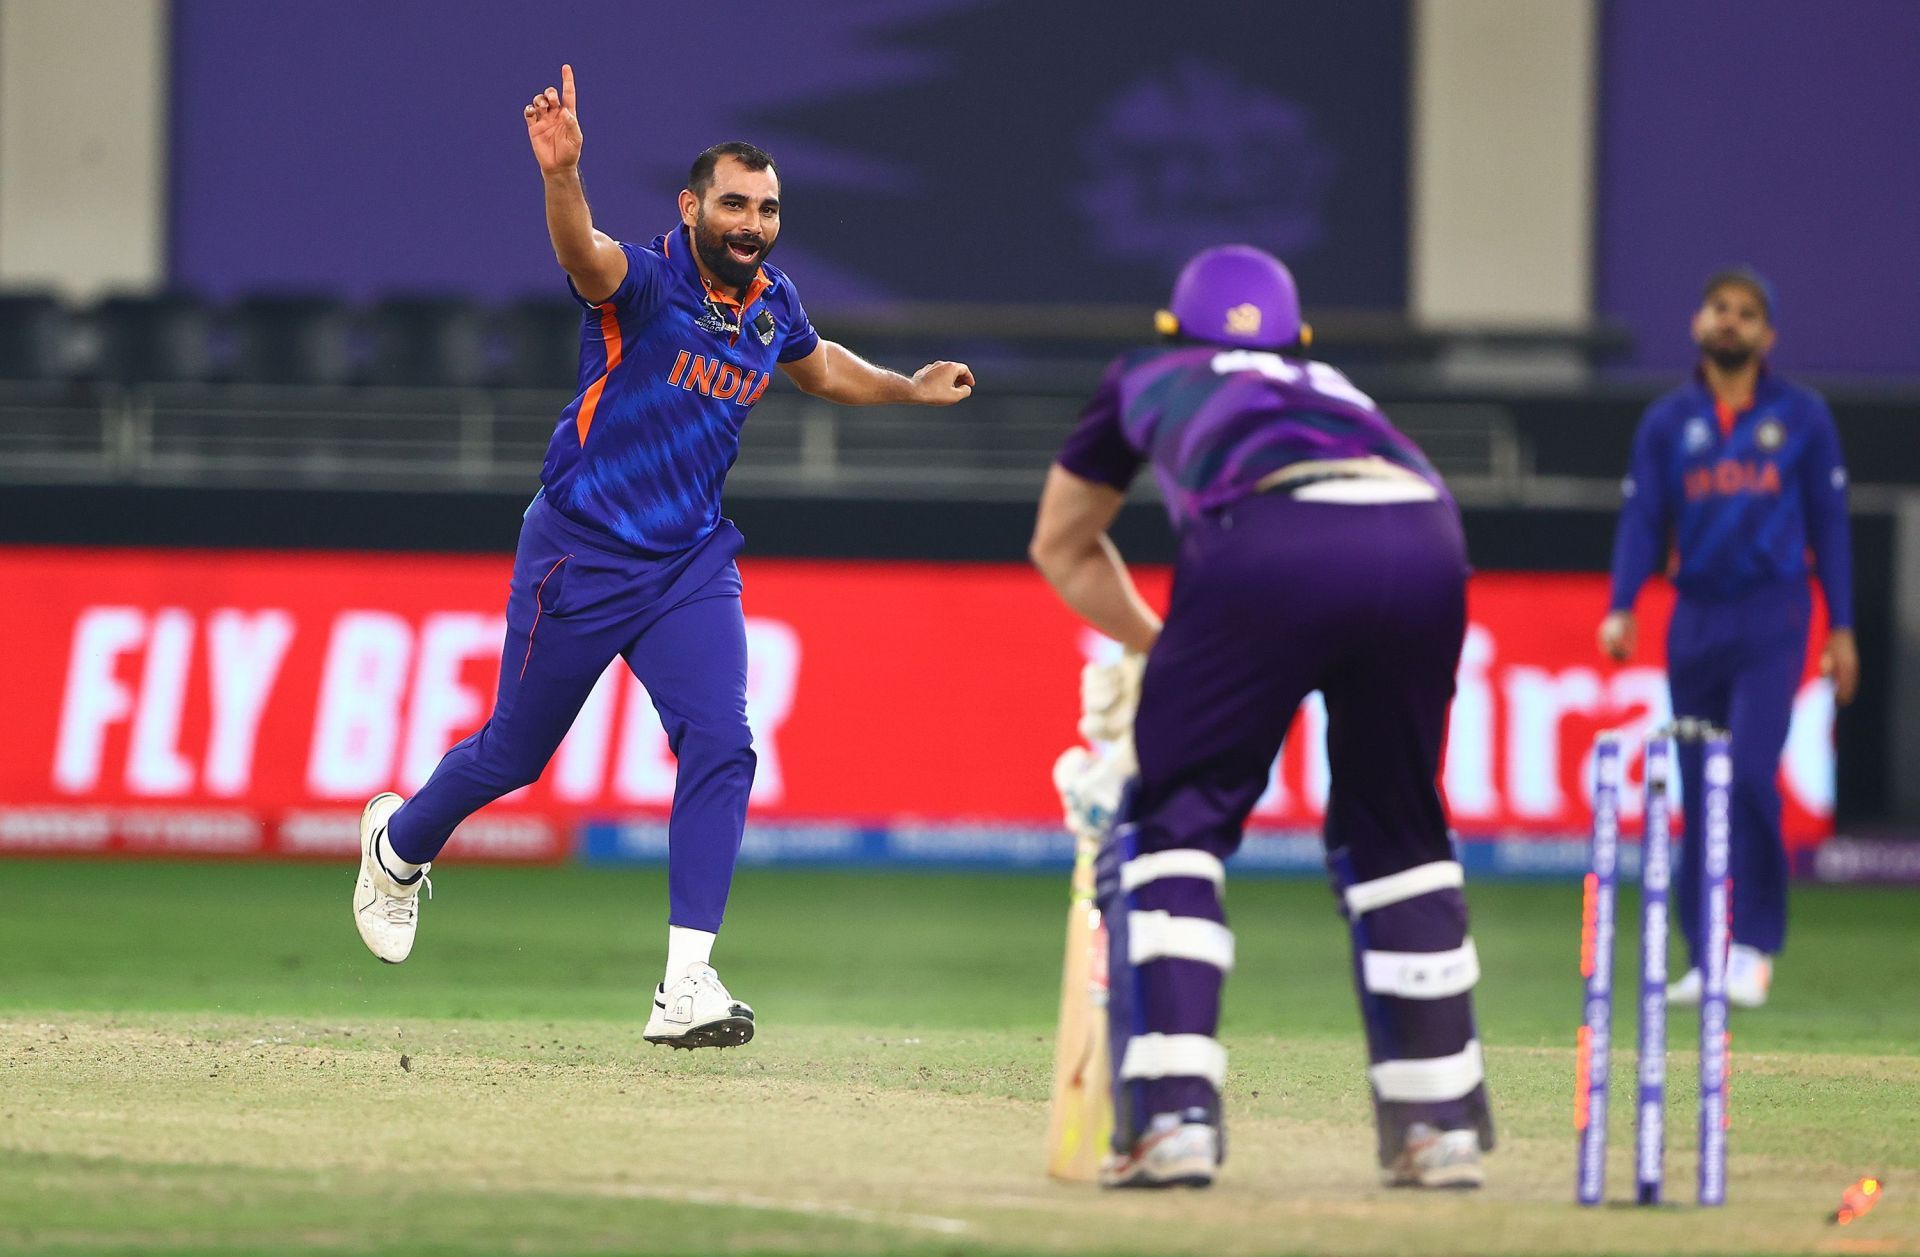 Mohammad Shami celebrates a wicket. Pic: Getty Images